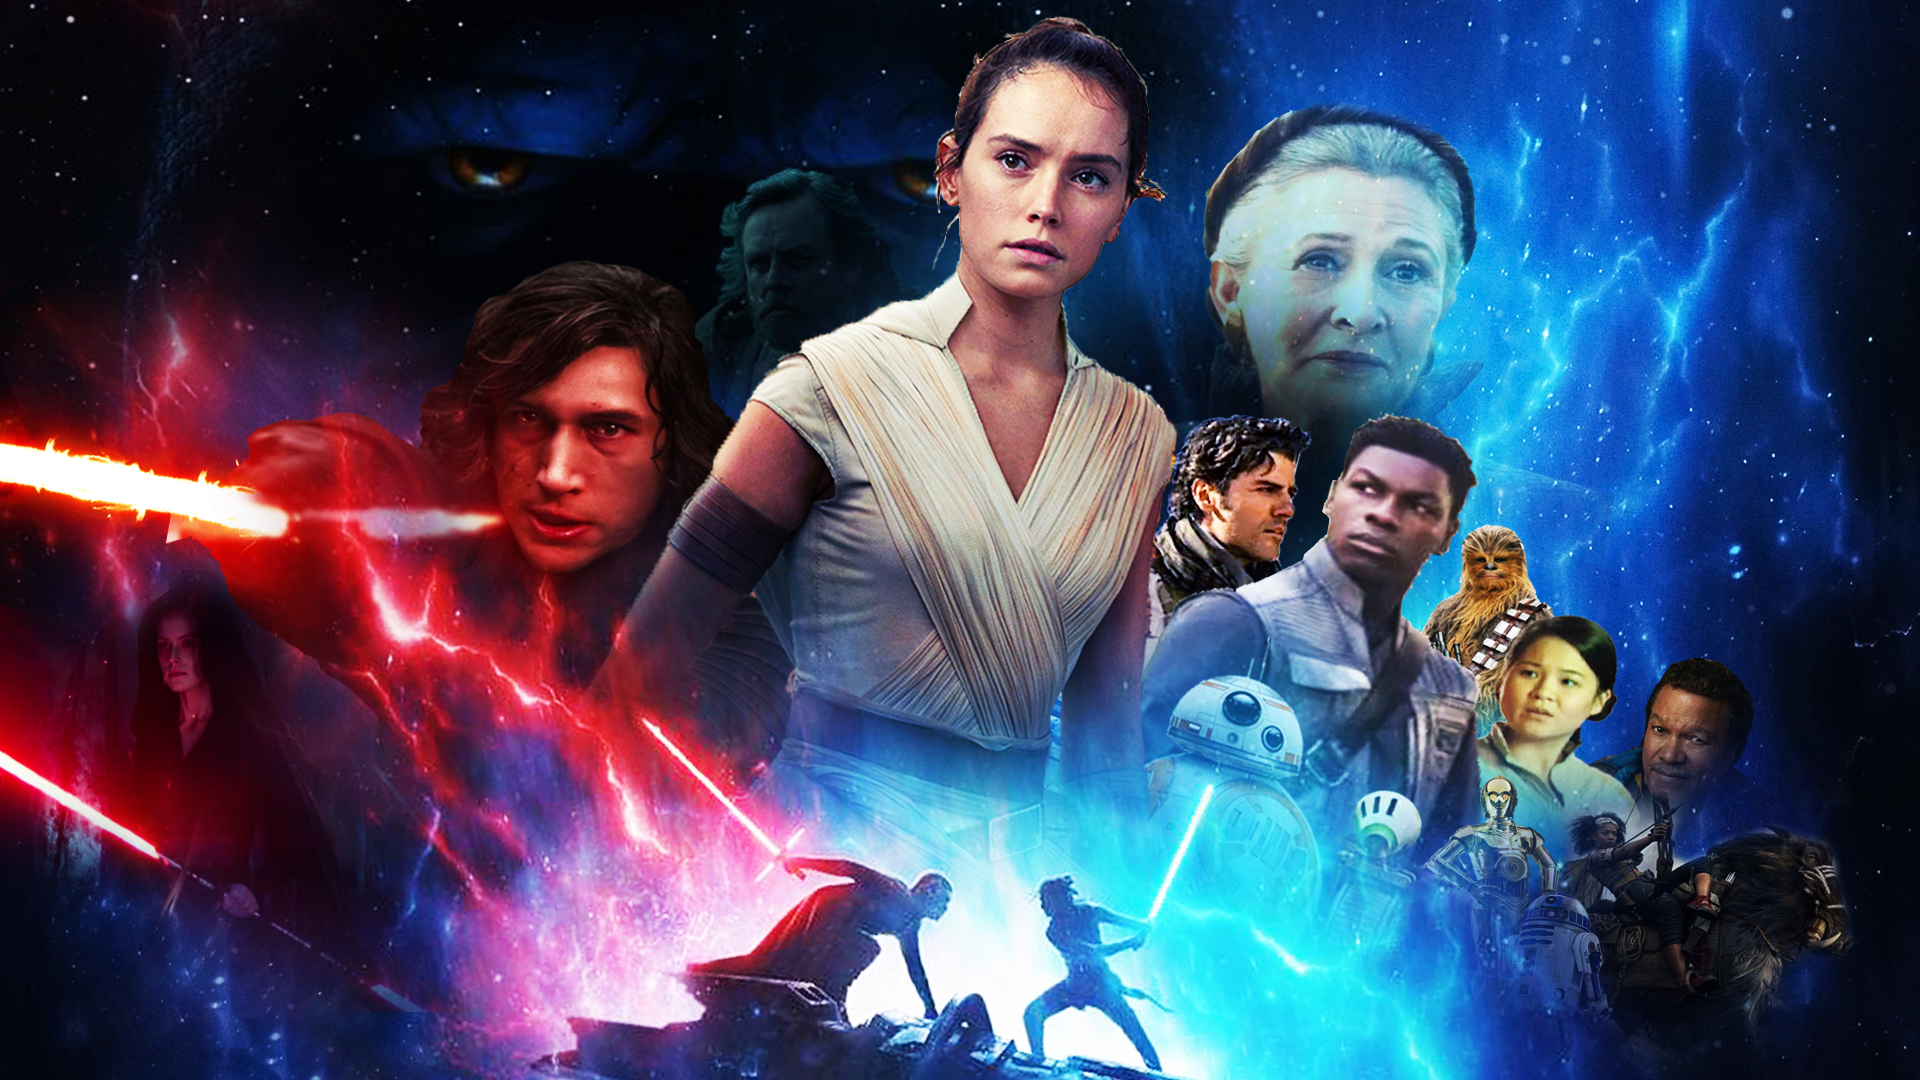 Star Wars: The Rise Of Skywalker Wallpapers